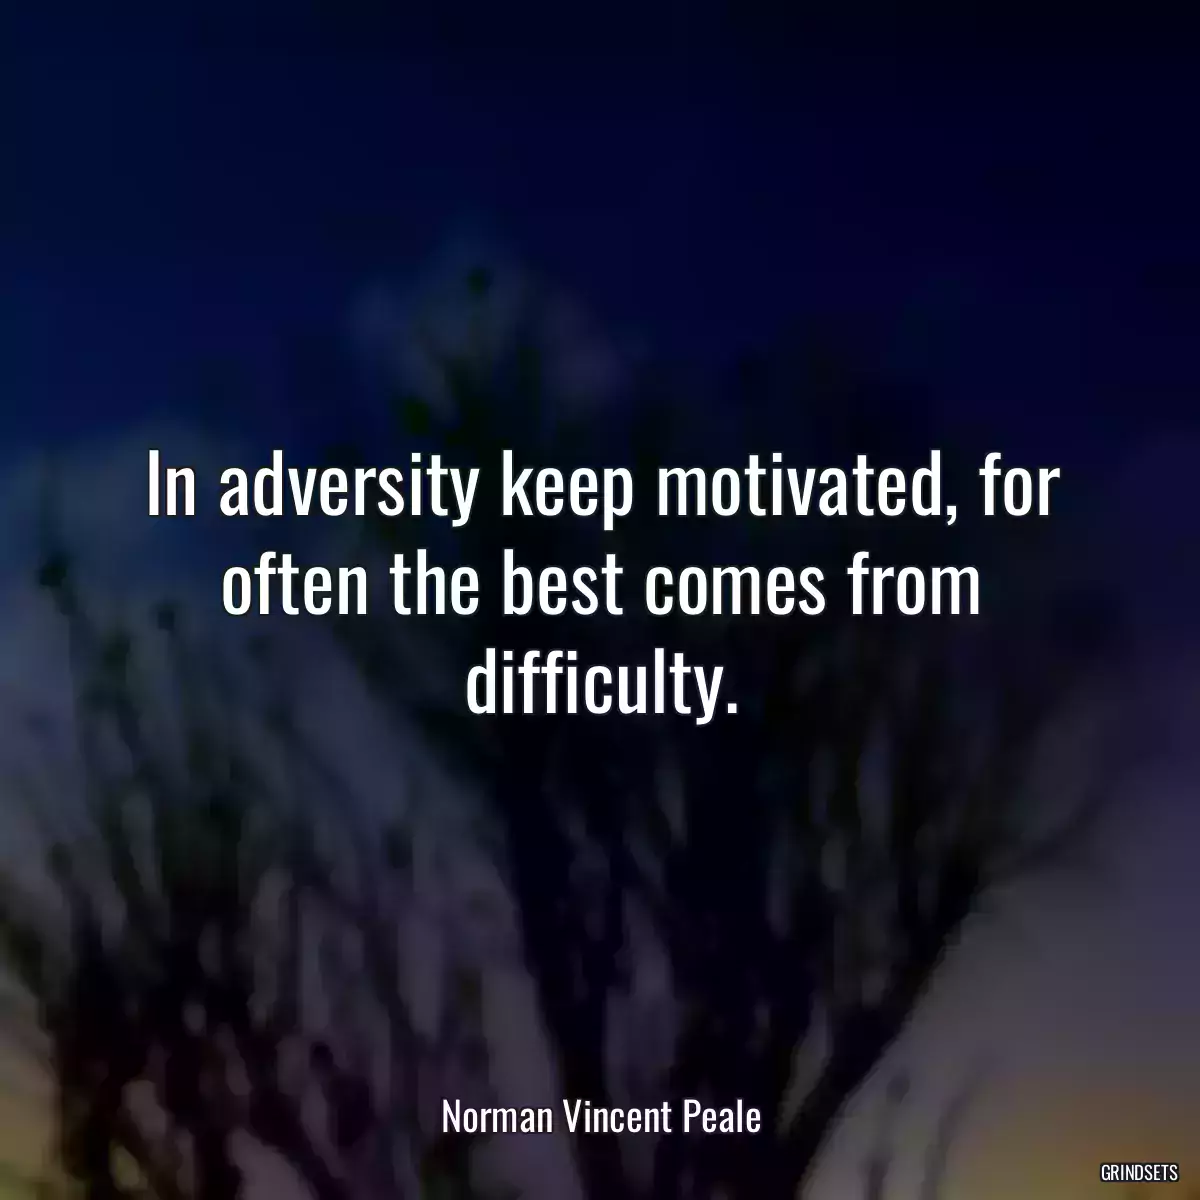 In adversity keep motivated, for often the best comes from difficulty.